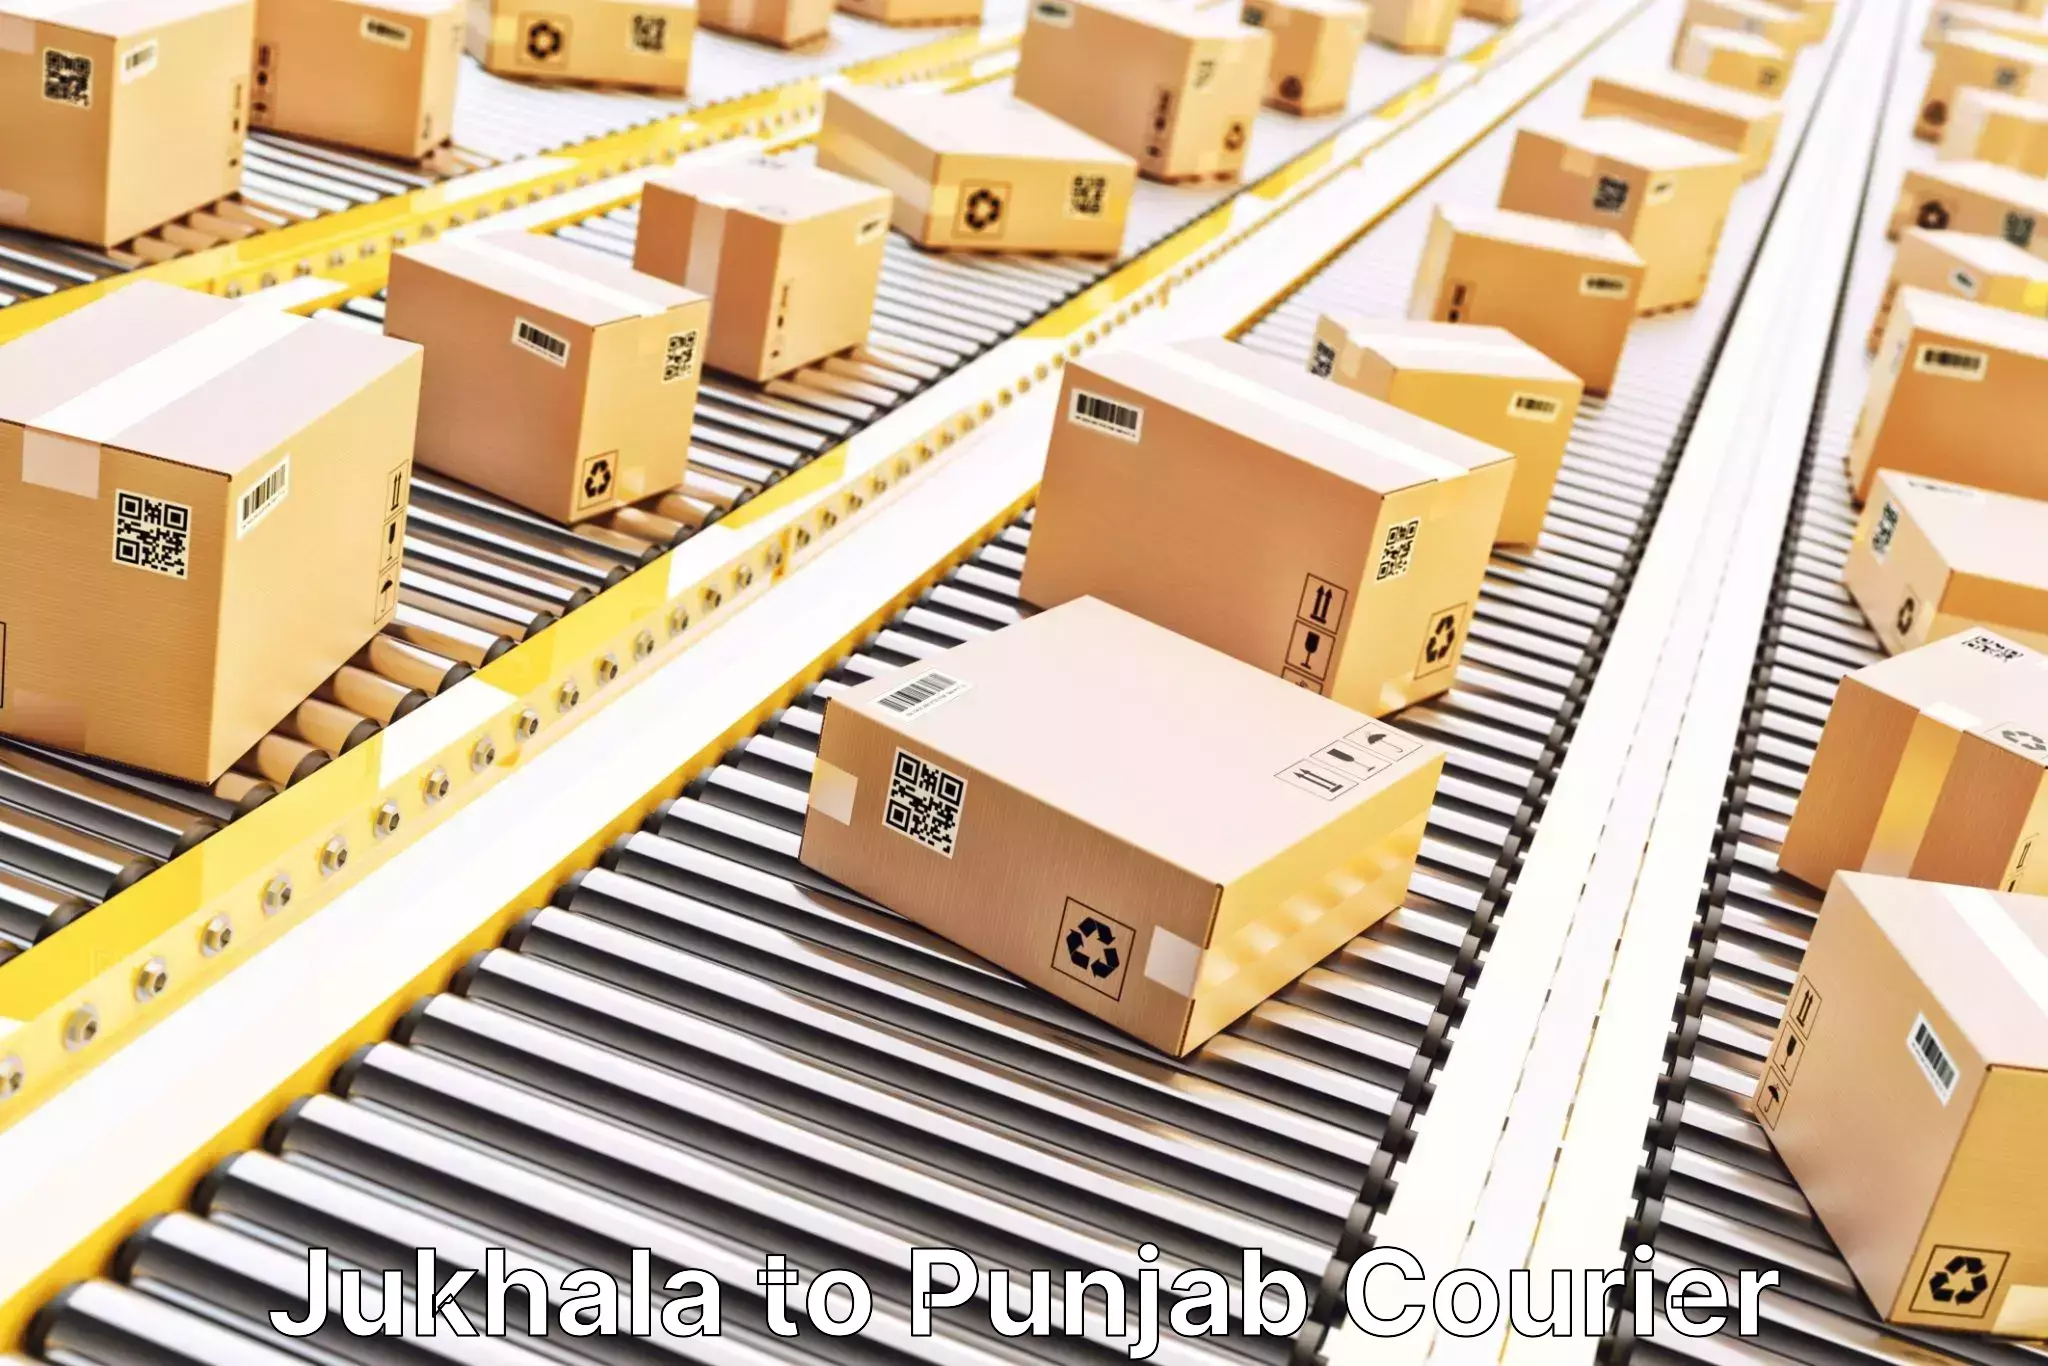 Package forwarding in Jukhala to Mohali